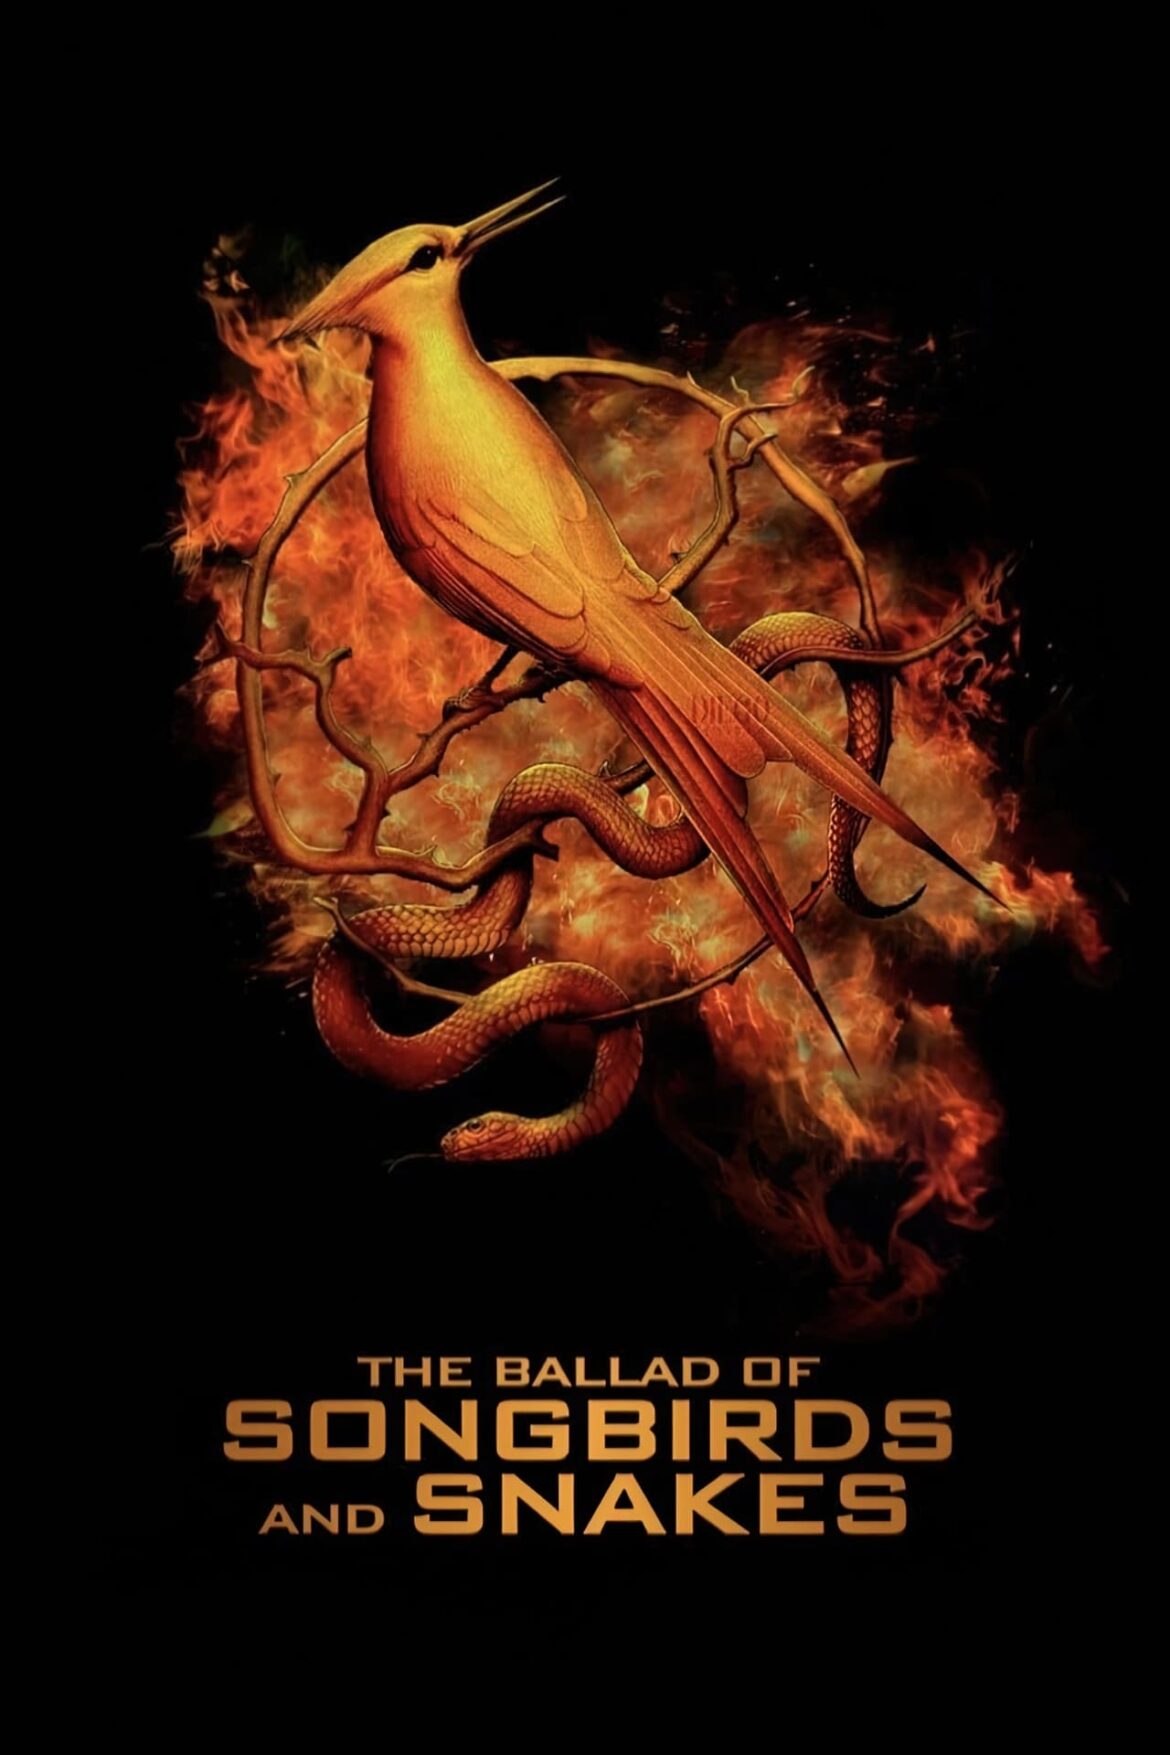 The Hunger Games – The Ballad of Songbirds and Snakes teaser released